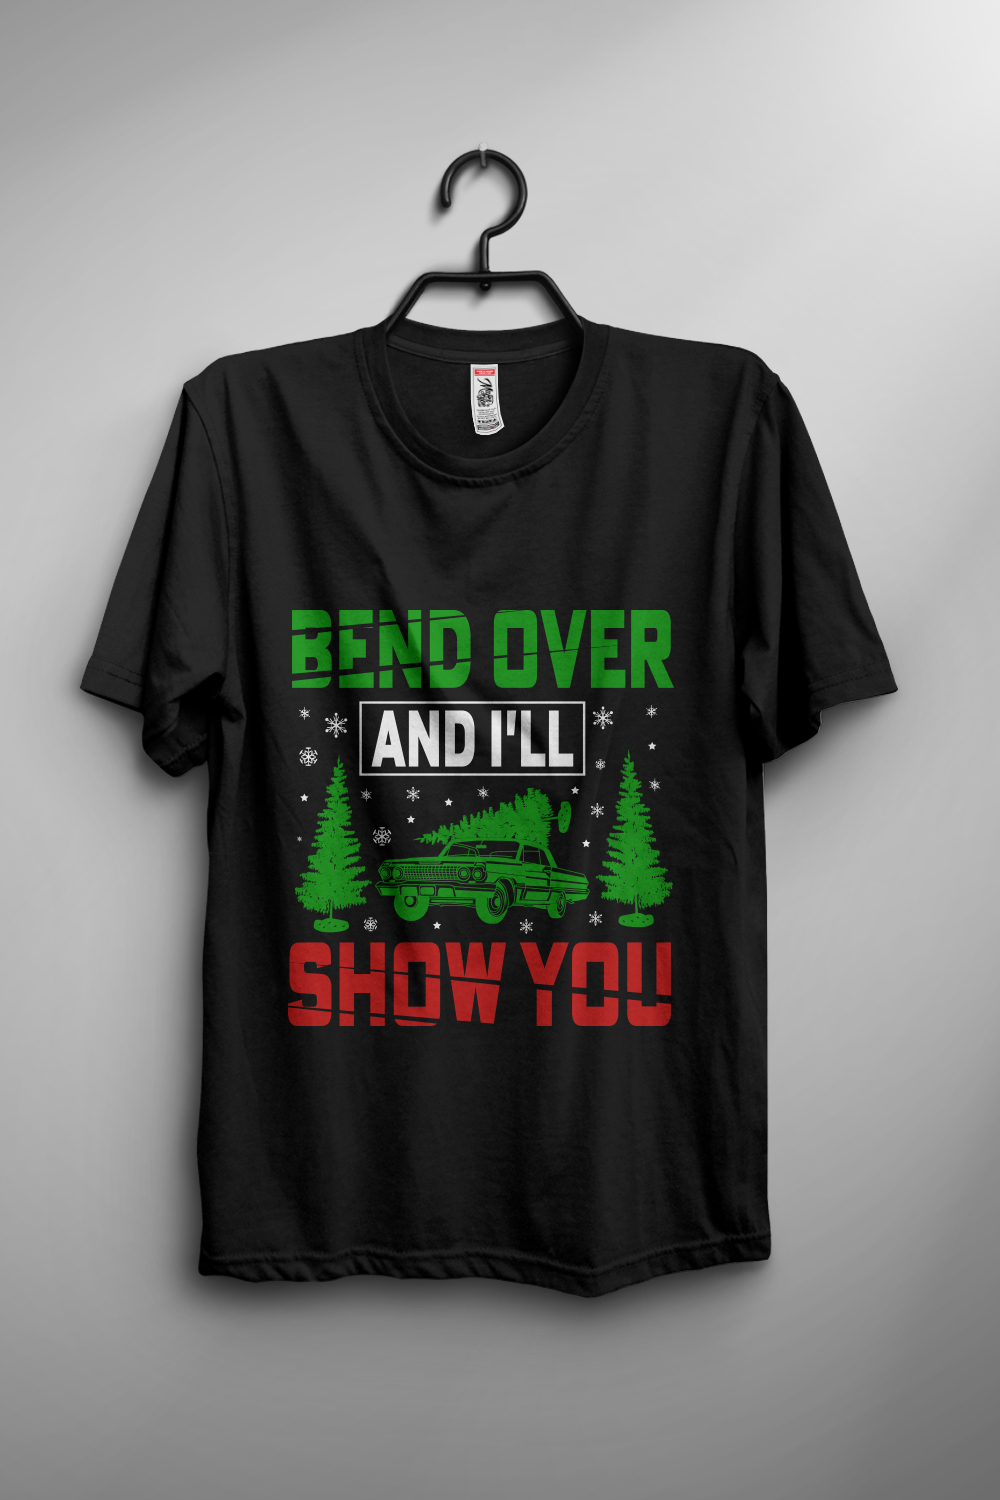 Bend over and i'll show you T-shirt design pinterest preview image.